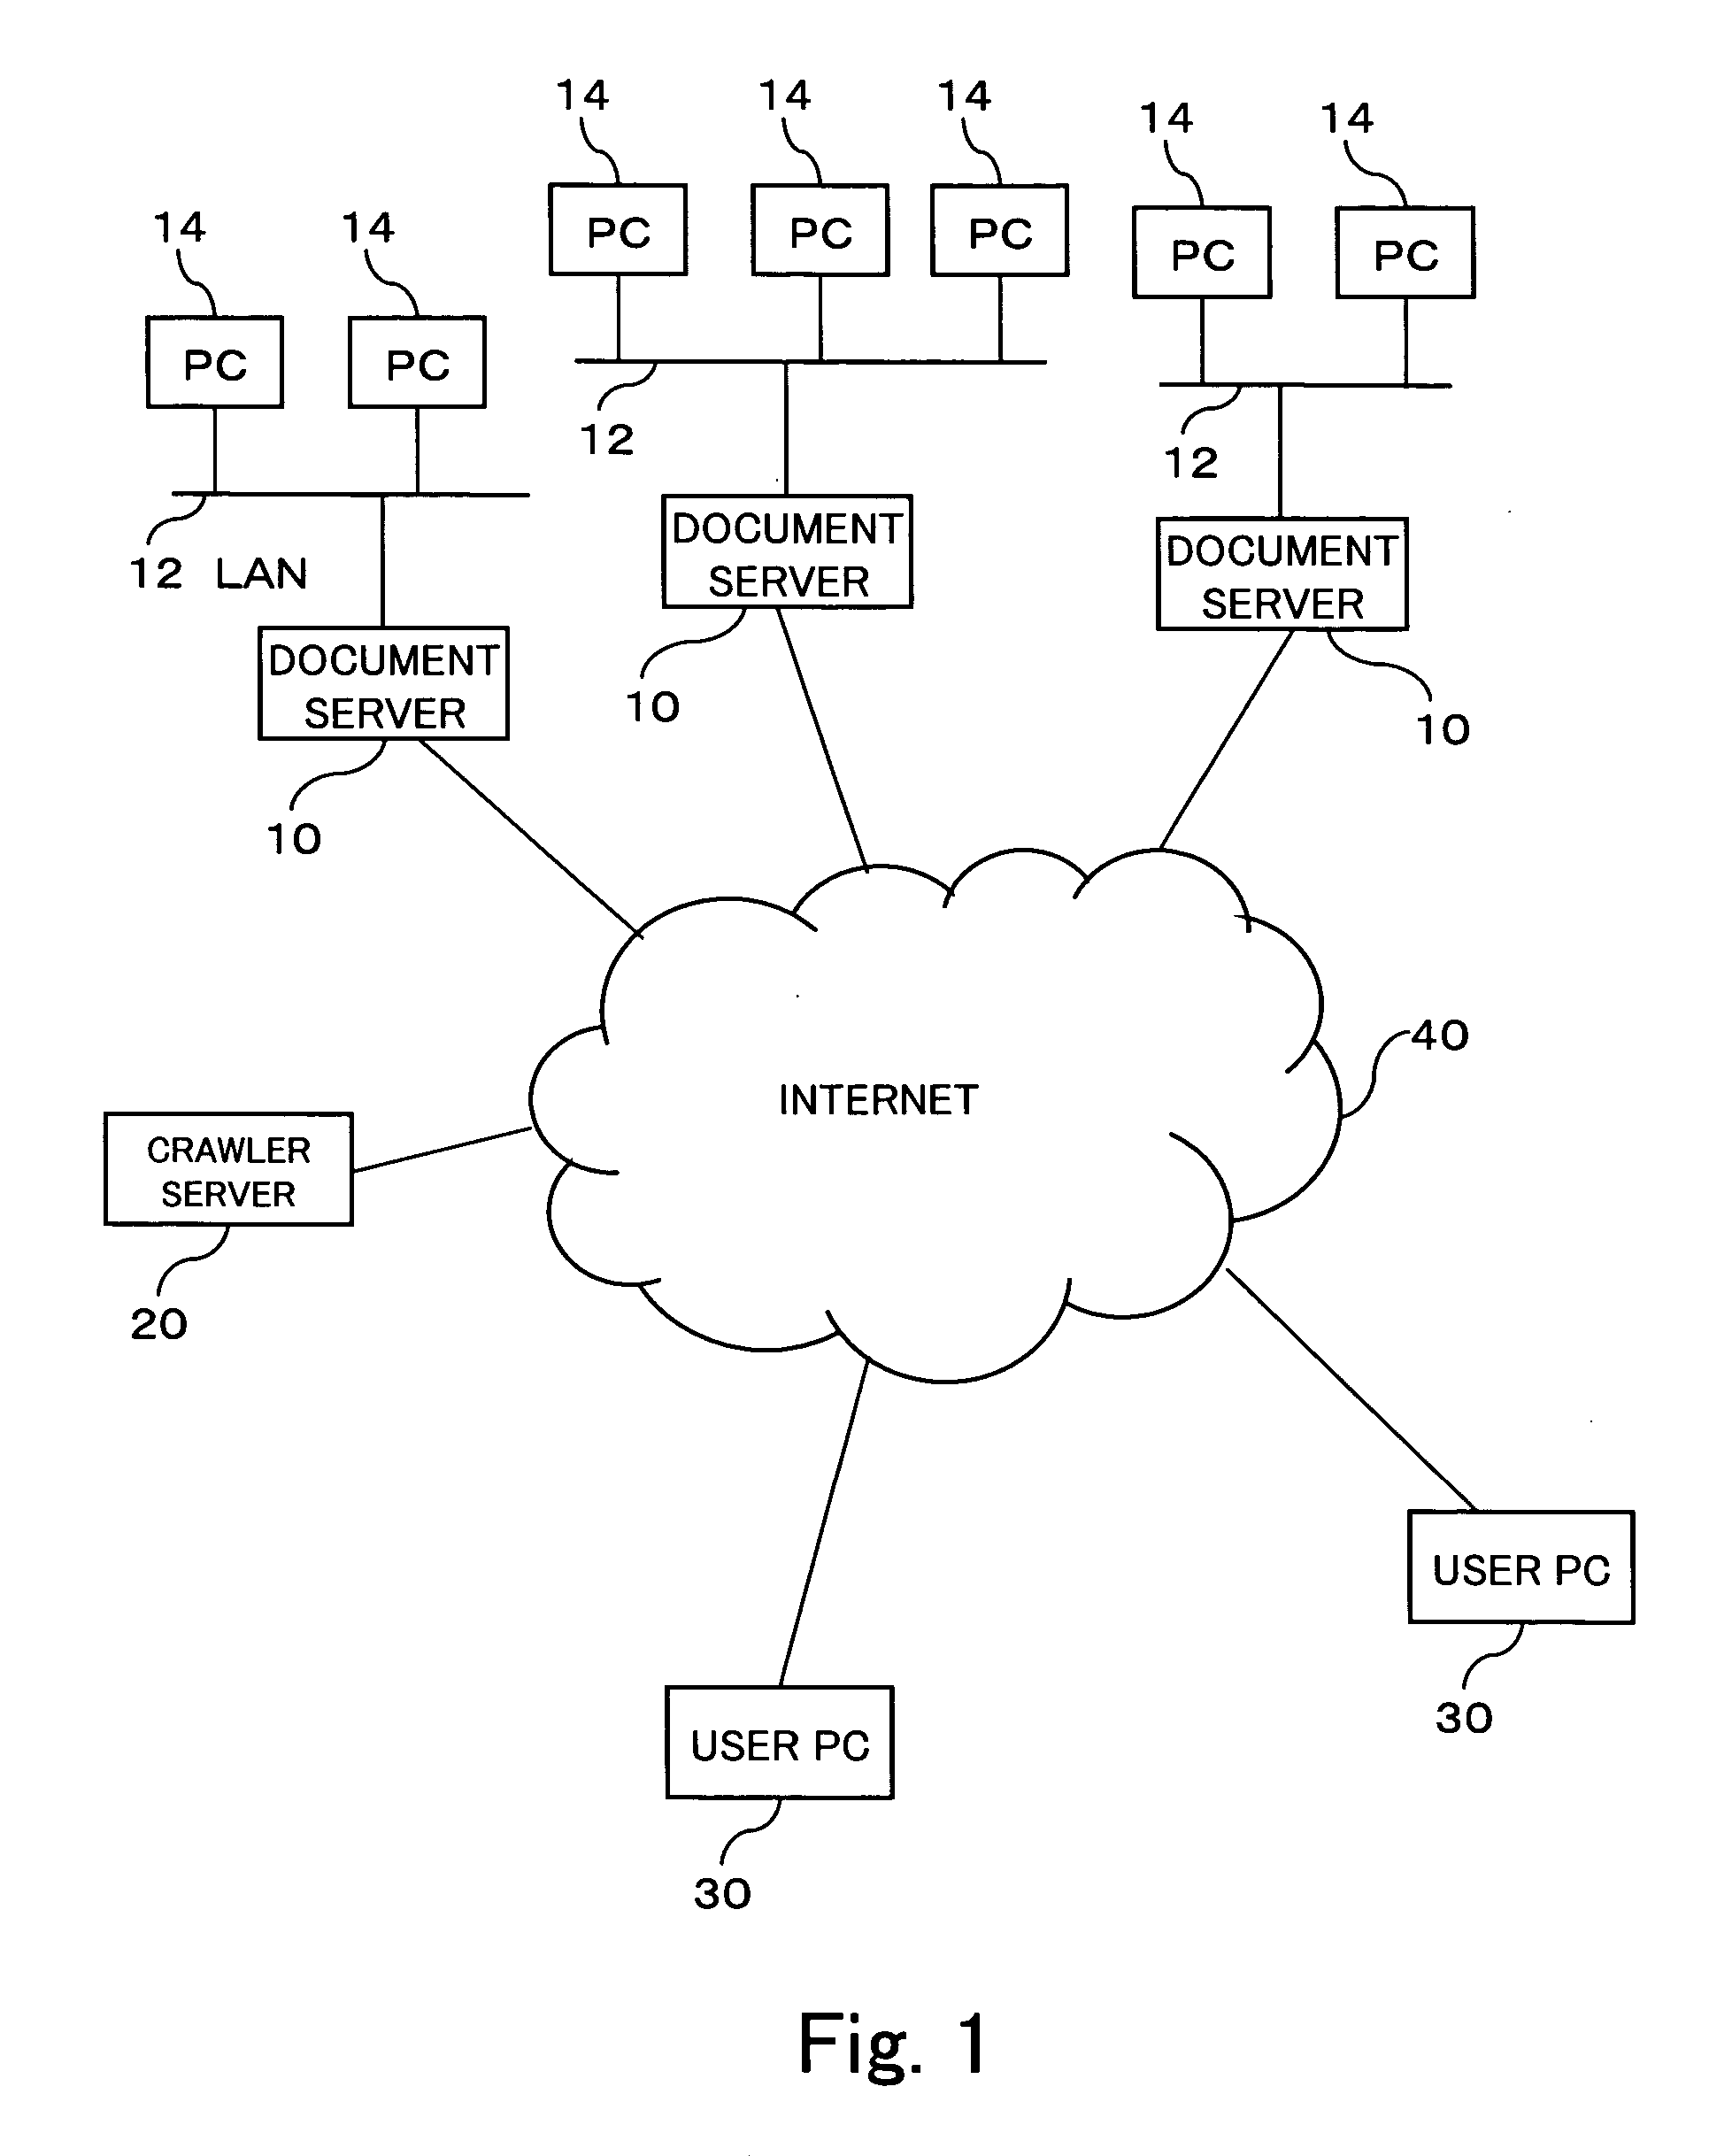 Computer program product, device system, and method for providing document view